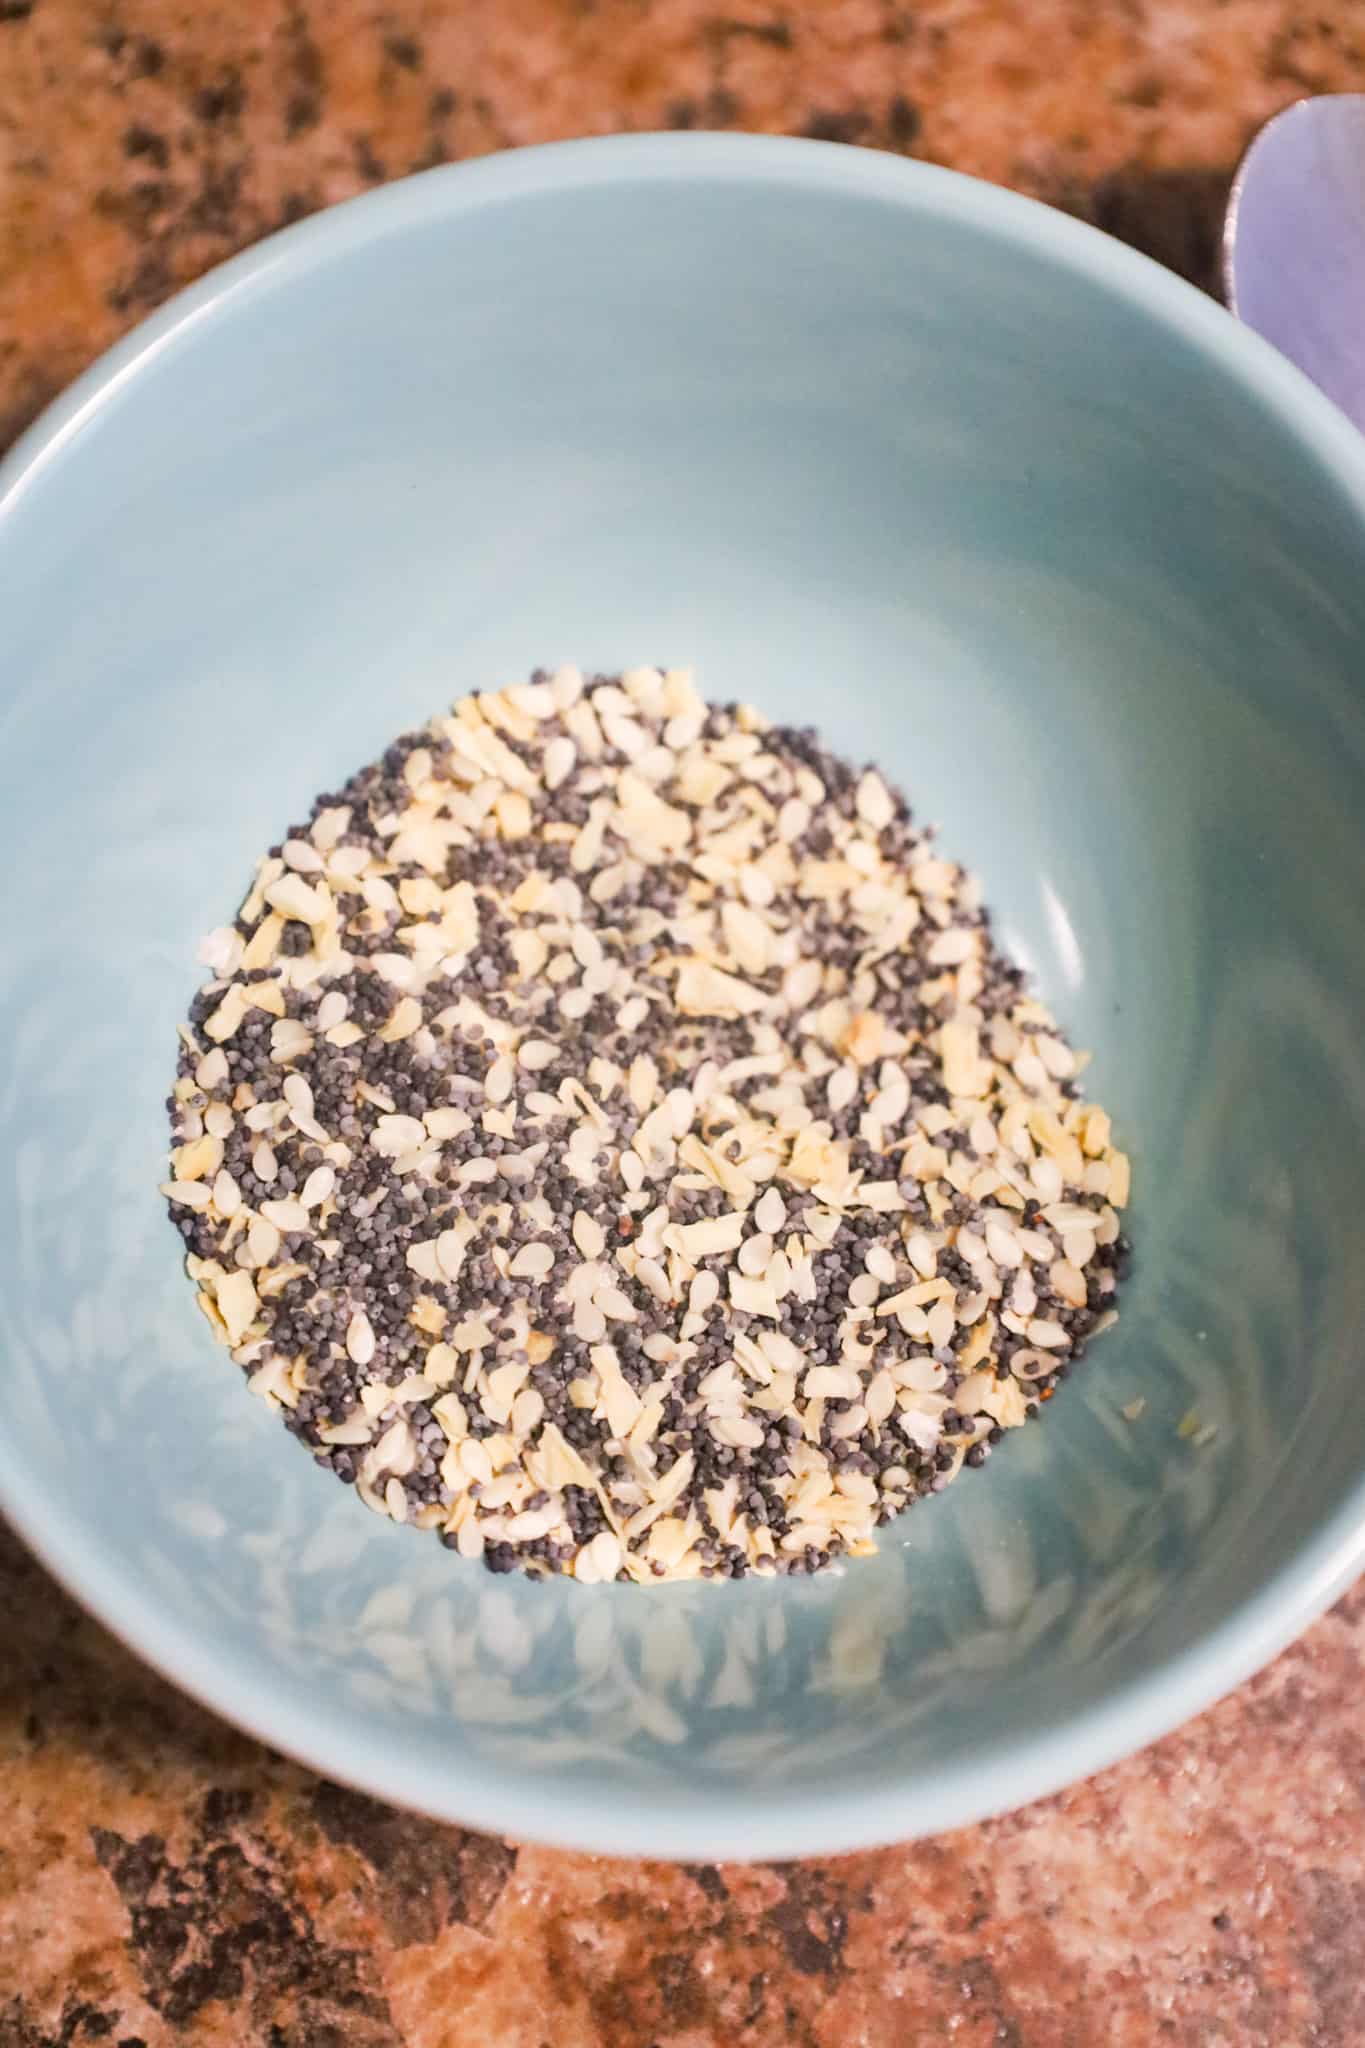 poppy seeds, sesame seeds, dehydrated minced onion and salt in a small bowl